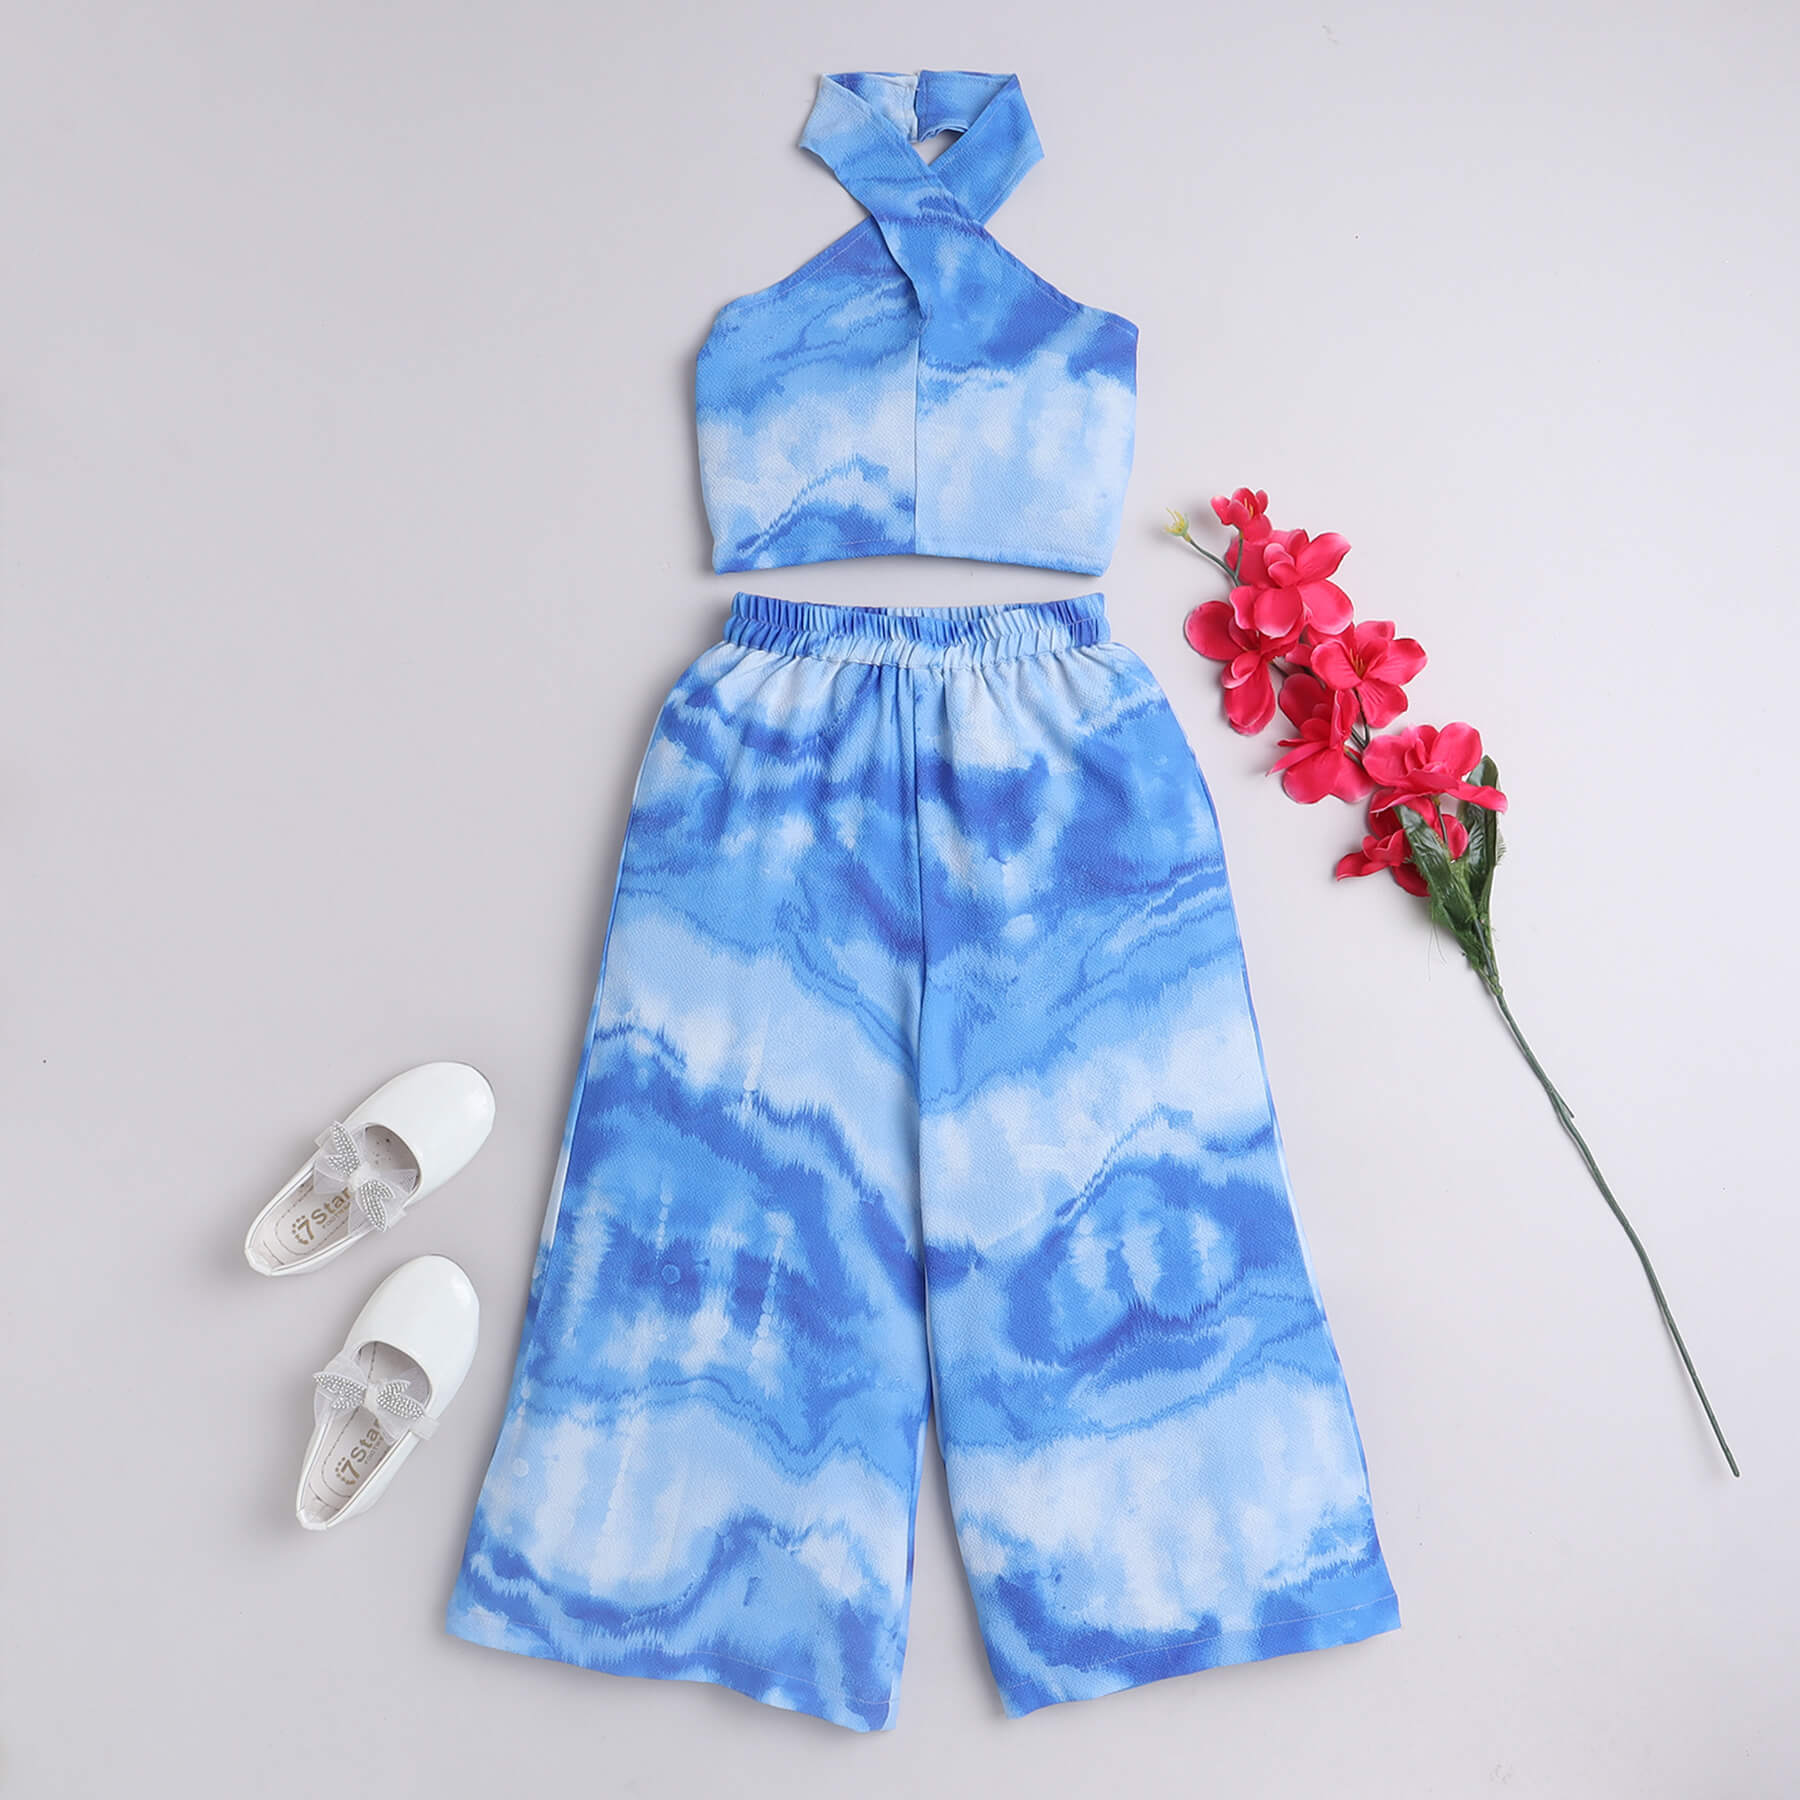 Taffykids Tie- dye printed sleeveless Halter neck Ethnic crop top and matching pant set-Blue/White